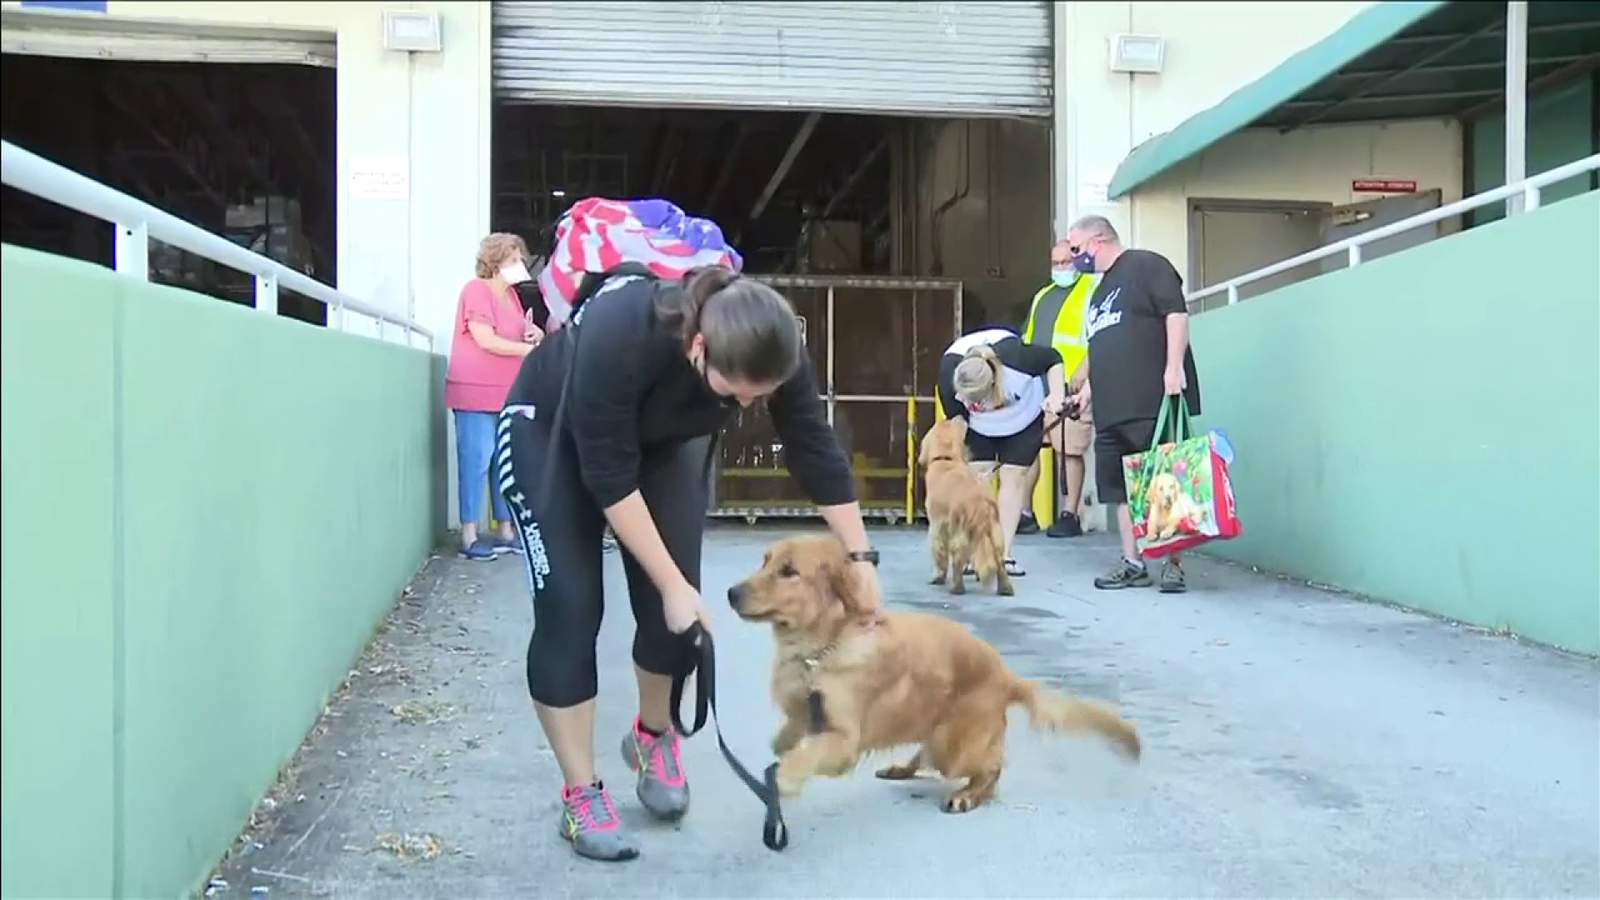 20 Golden retrievers that were saved from a Chinese slaughter finally arrived in Miami!